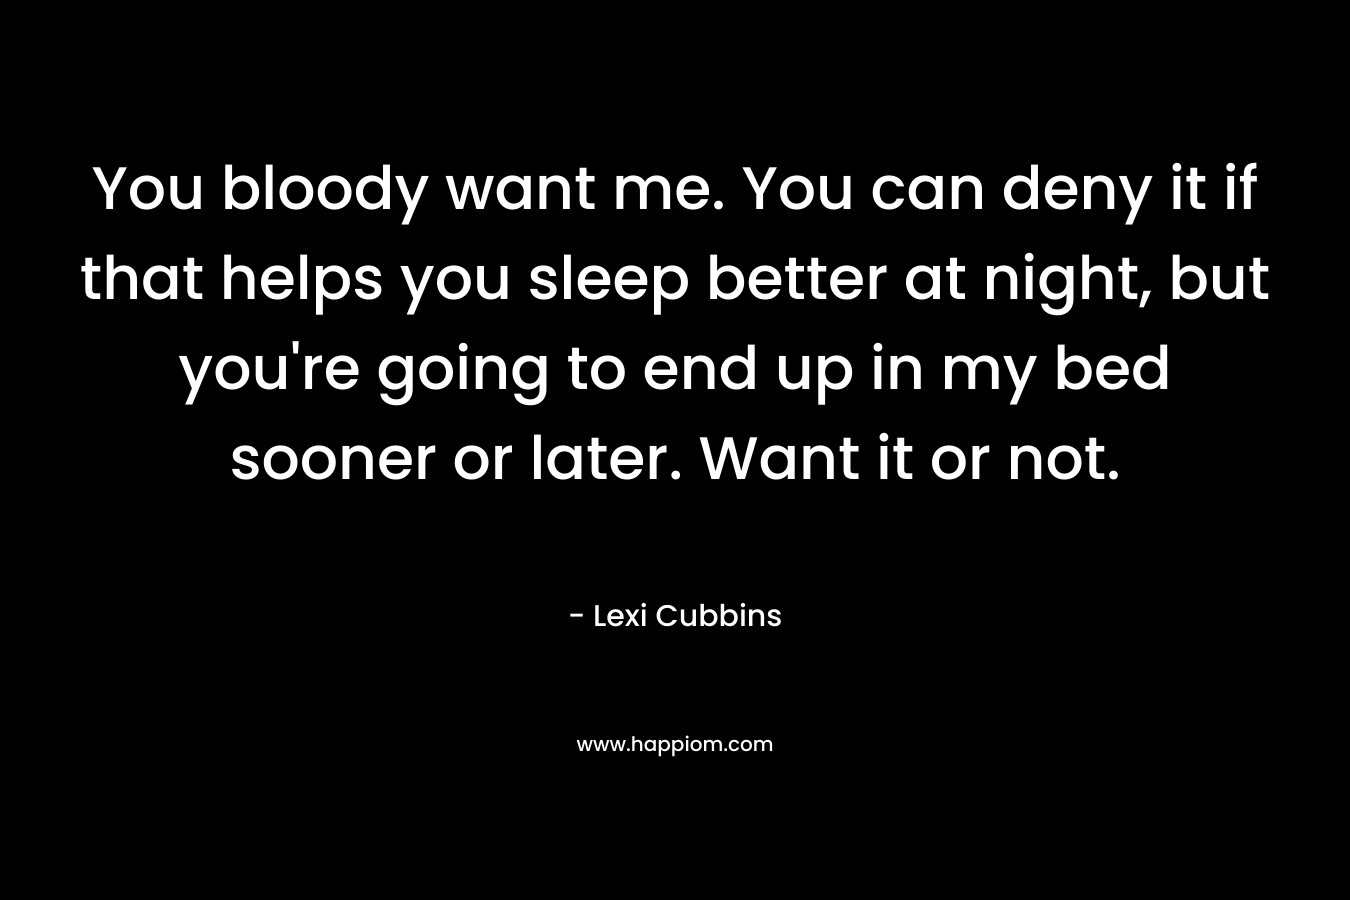 You bloody want me. You can deny it if that helps you sleep better at night, but you’re going to end up in my bed sooner or later. Want it or not. – Lexi Cubbins